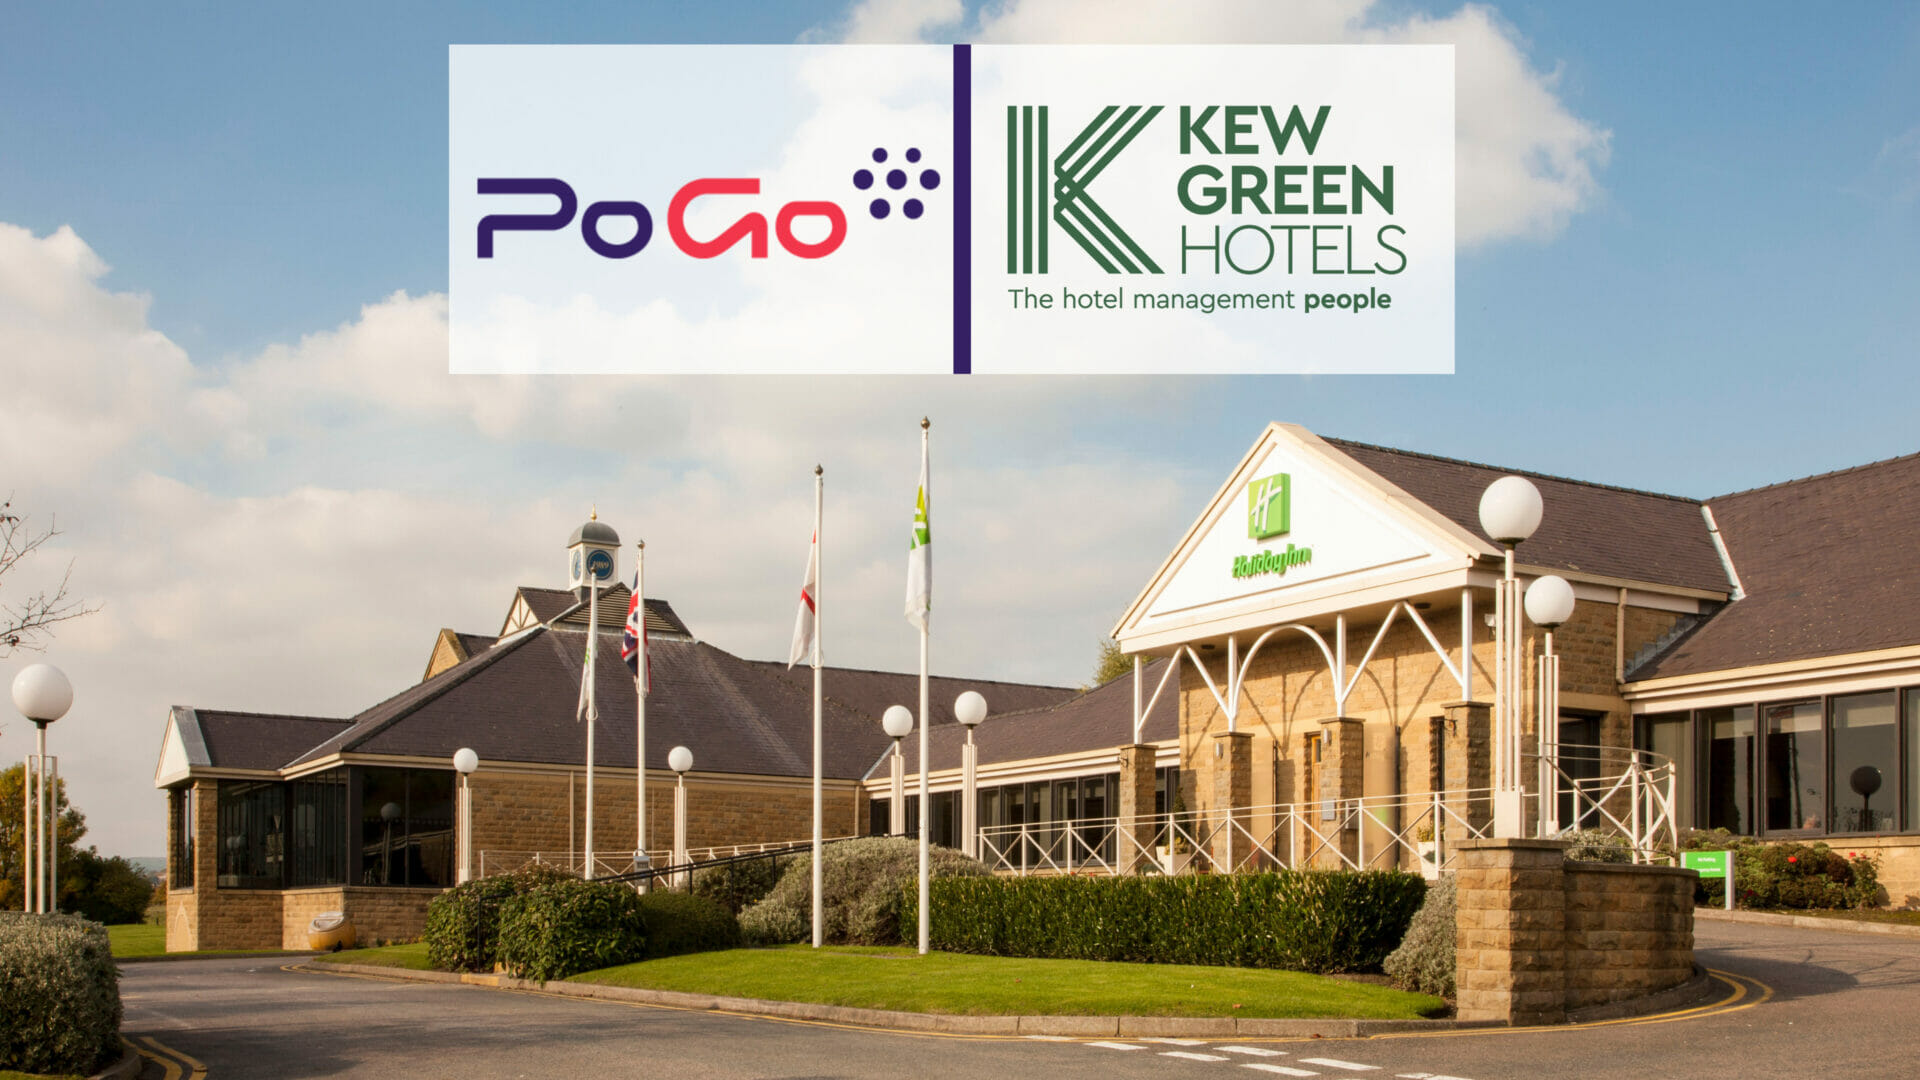 PoGo makes major leap forward in development of its EV Charging Network through partnership with Kew Green Hotels